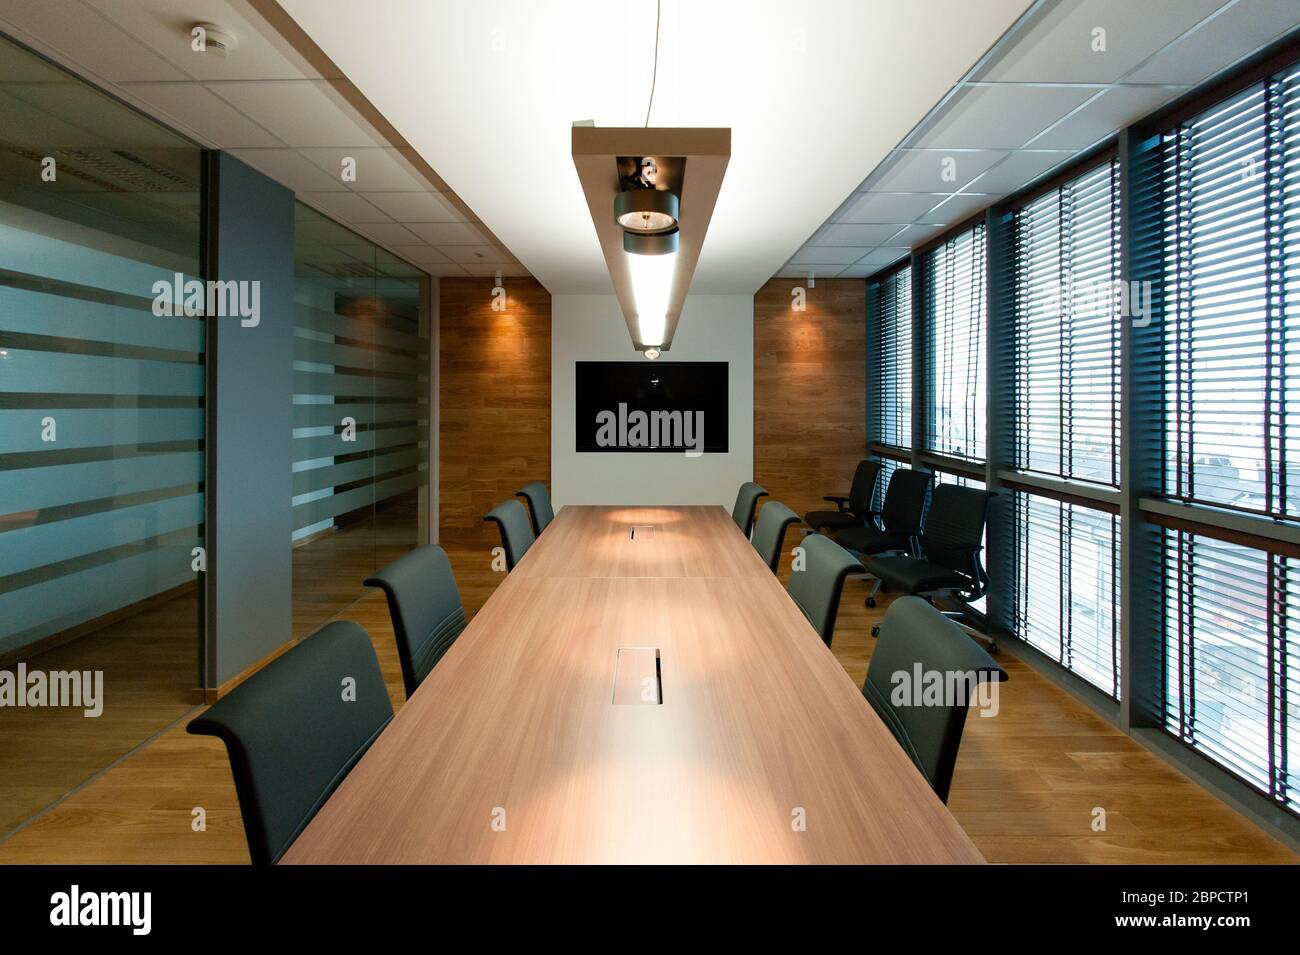 Empty office conference room interior with table and chairs Stock Photo